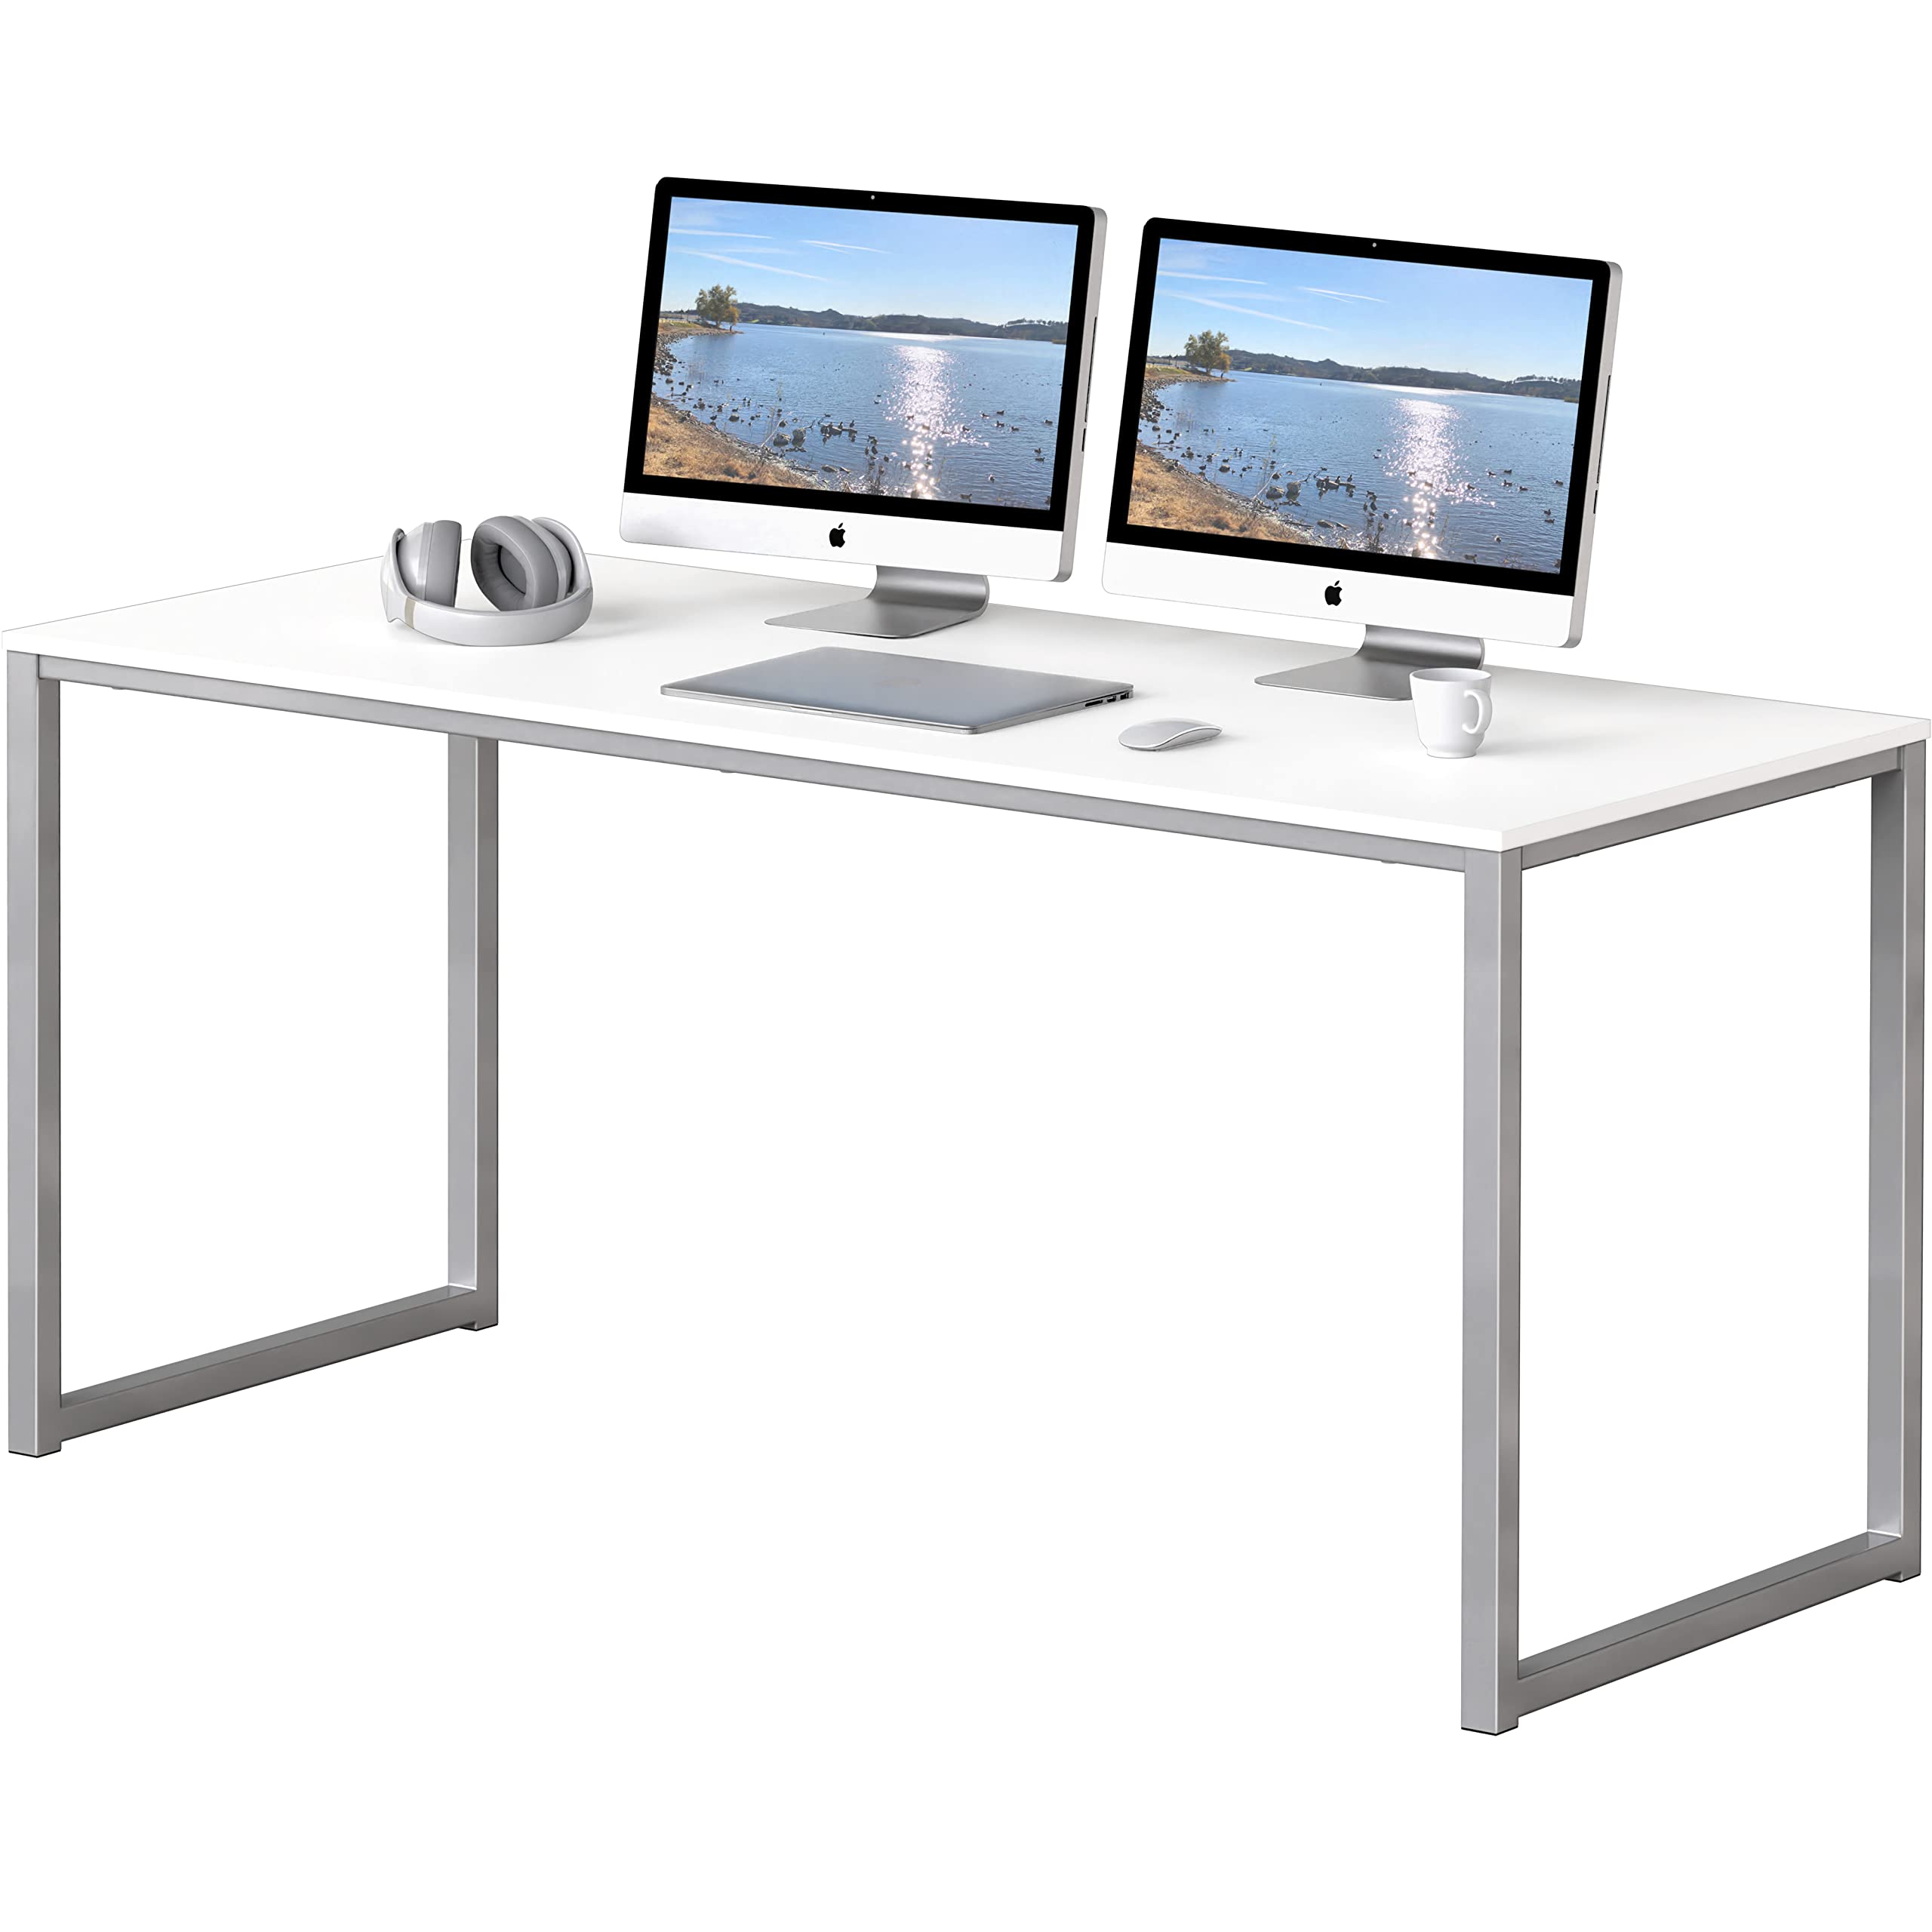 SHW Mission 55-Inch Home Office Solo Computer Desk, White - image 1 of 5